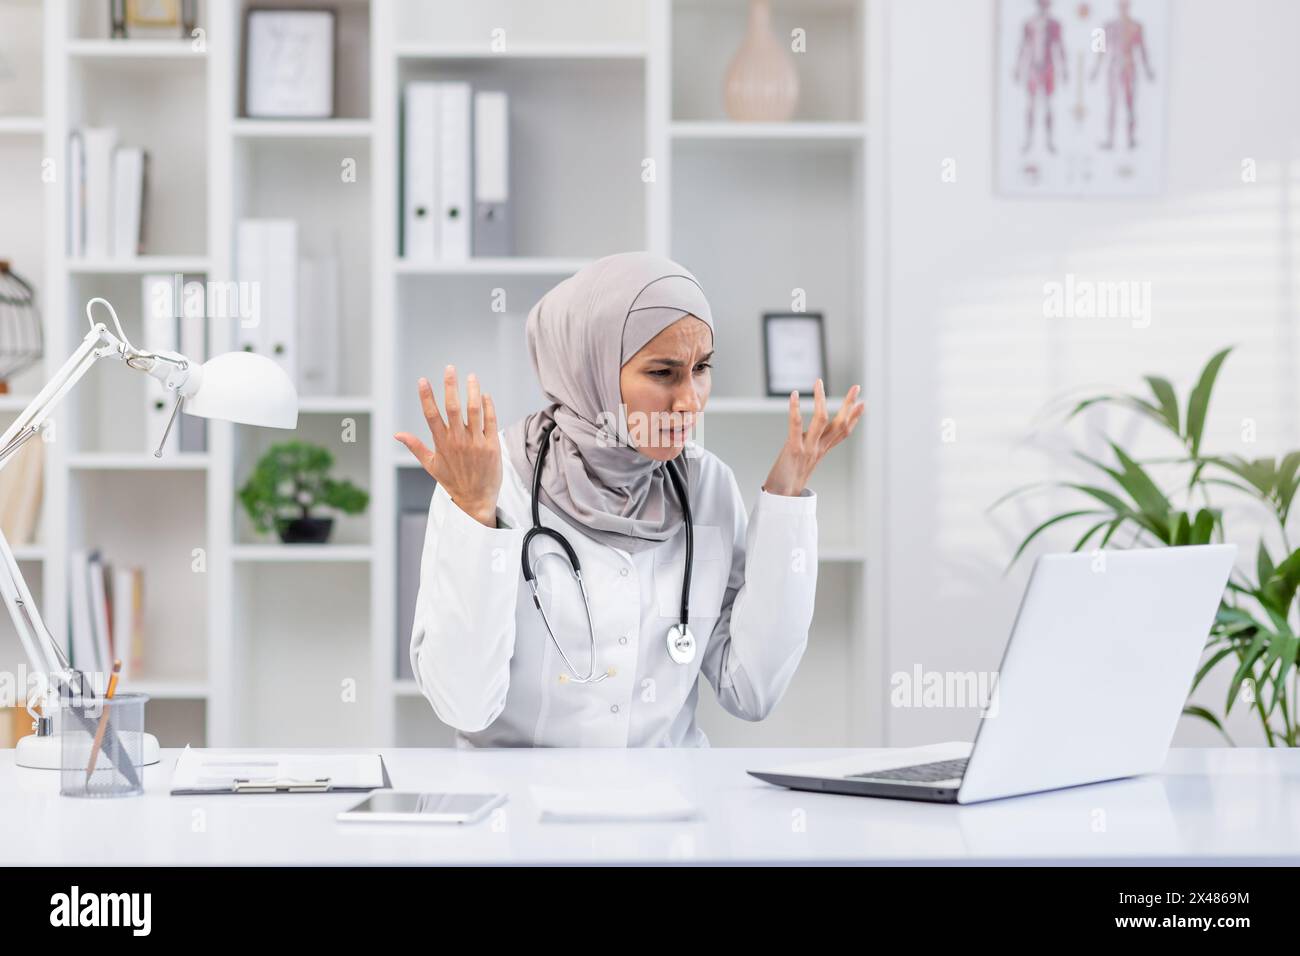 Professional female doctor wearing a hijab looks frustrated while working on her laptop in a modern clinic office. Perfect image for healthcare challe Stock Photo